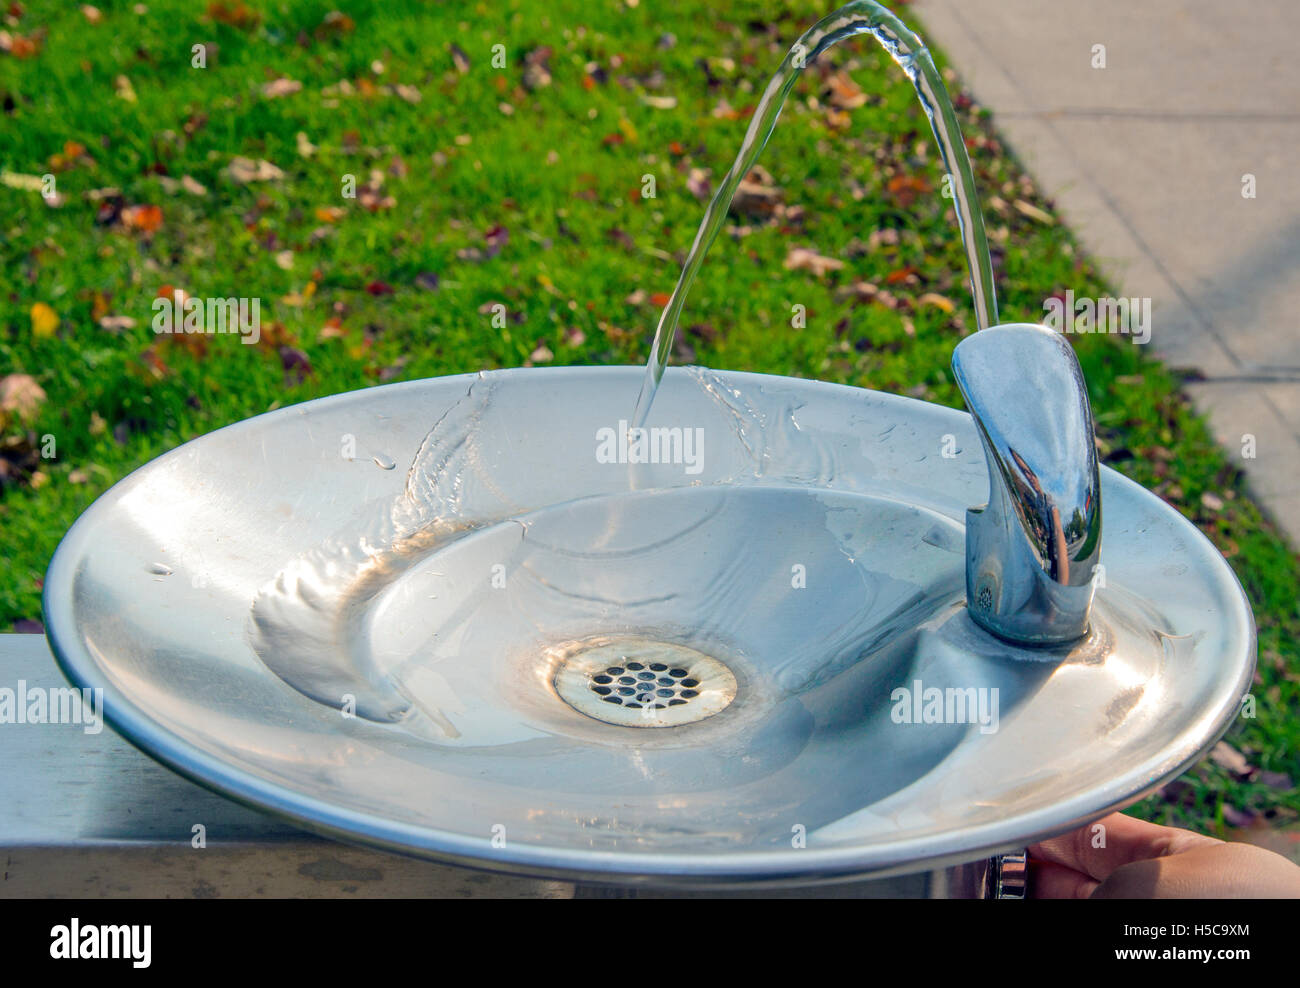 Park water fountain turned on with water flowing down Stock Photo